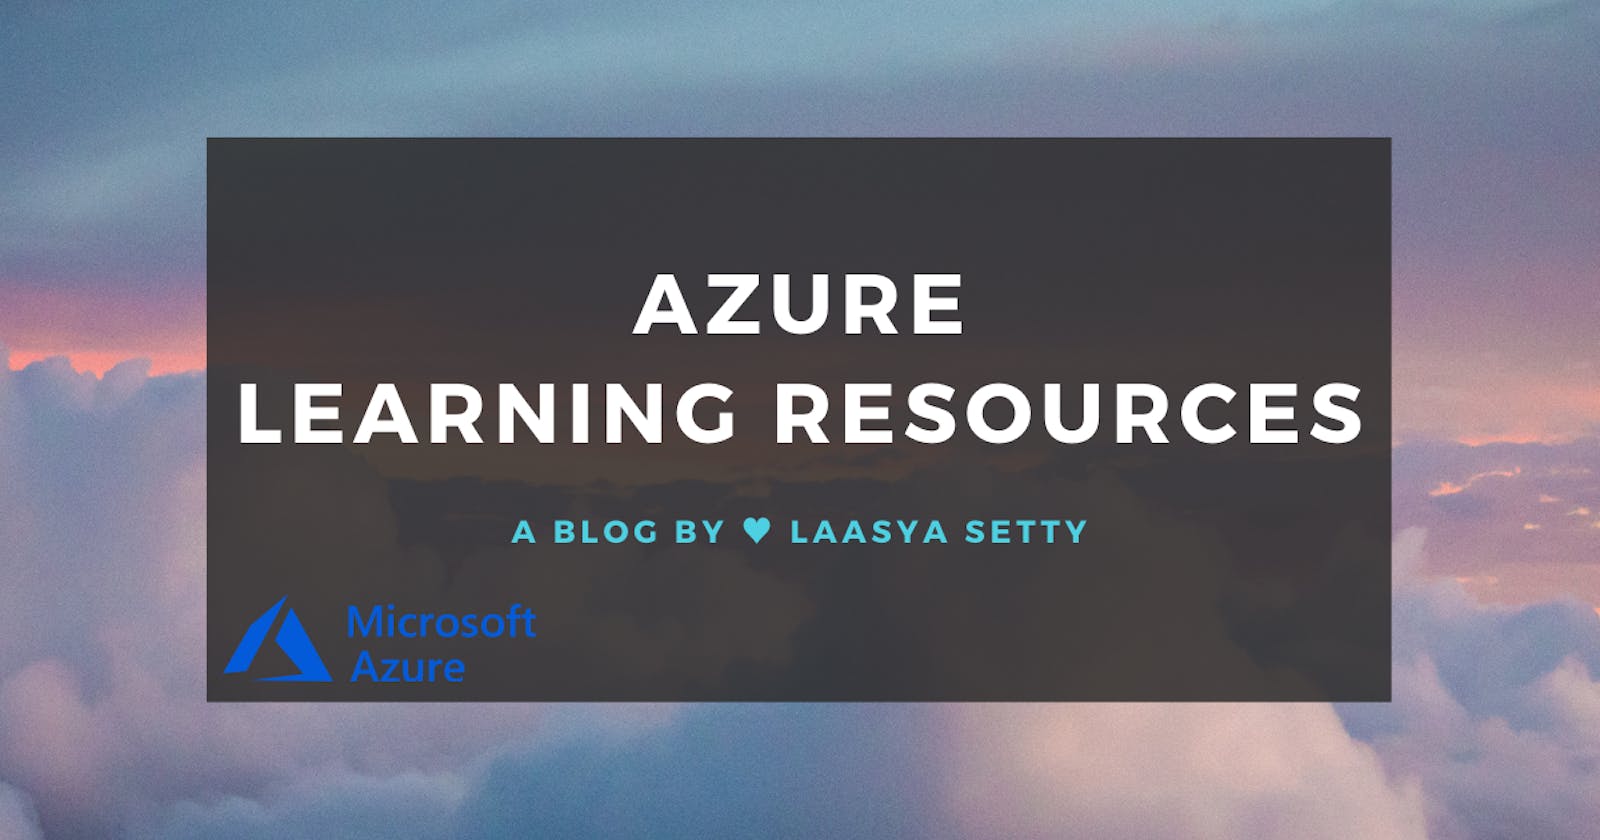 My Curation of Microsoft Azure Learning Resources!